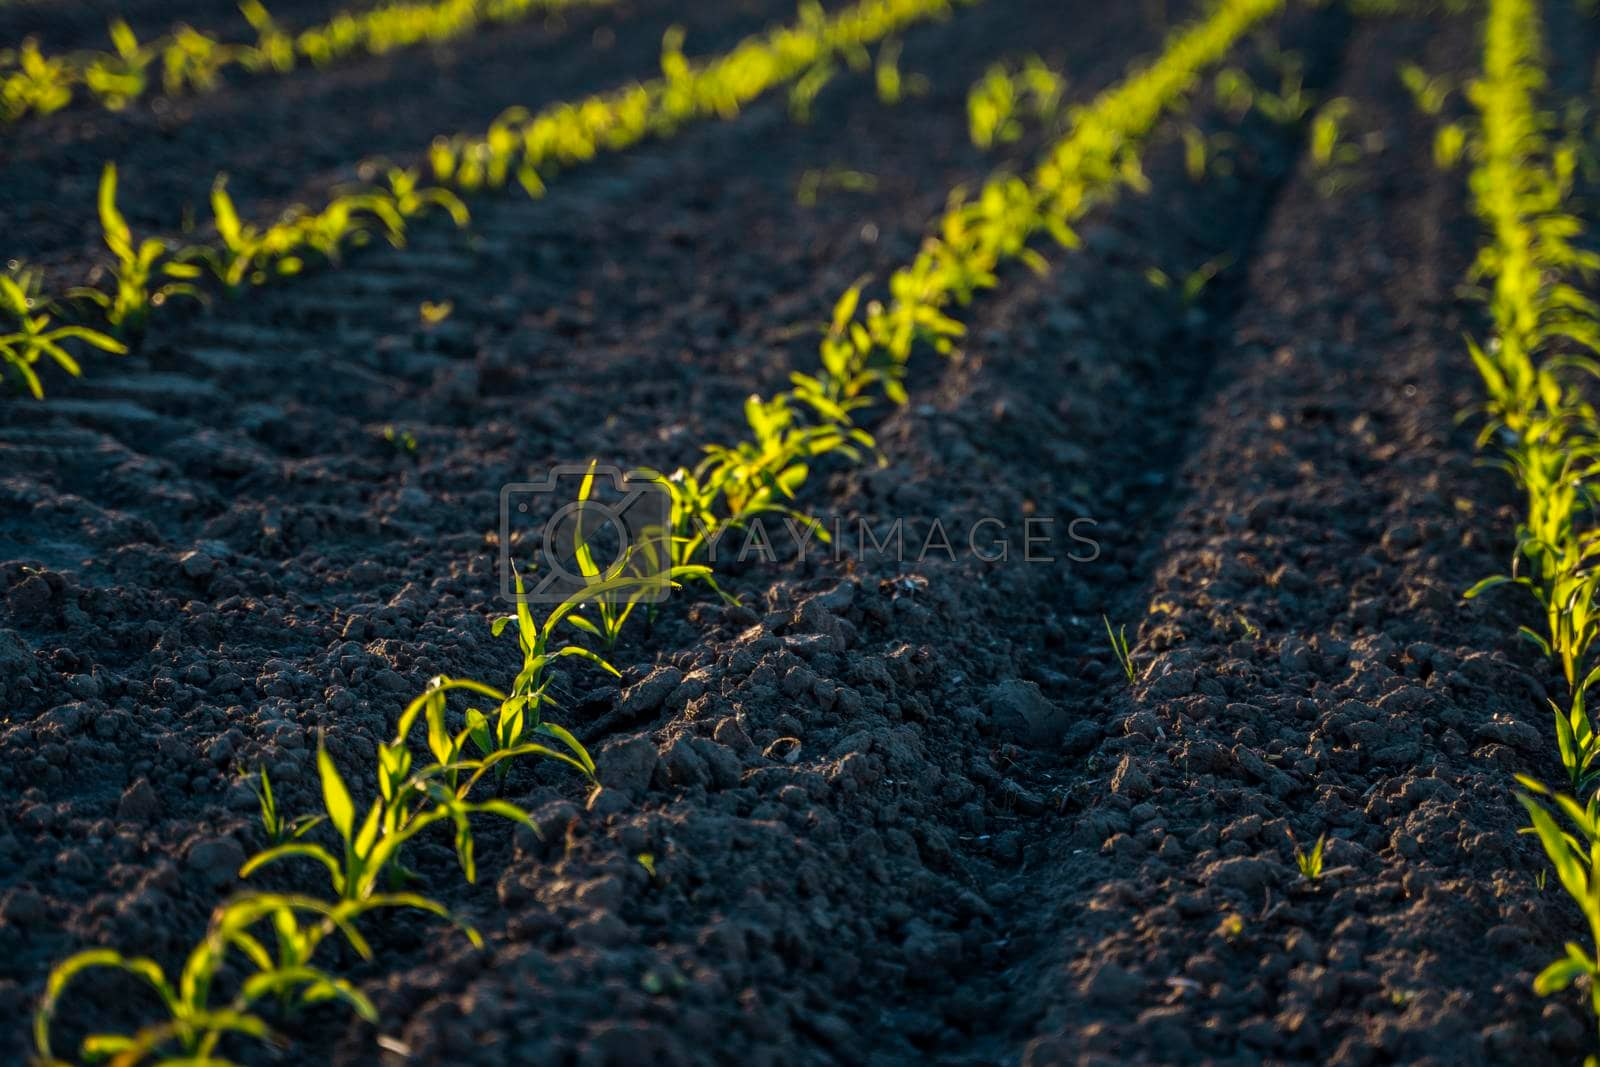 Royalty free image of Fresh young green maize plants in curved rows. Corn is growing on a agricultural field. Black soil. by vovsht